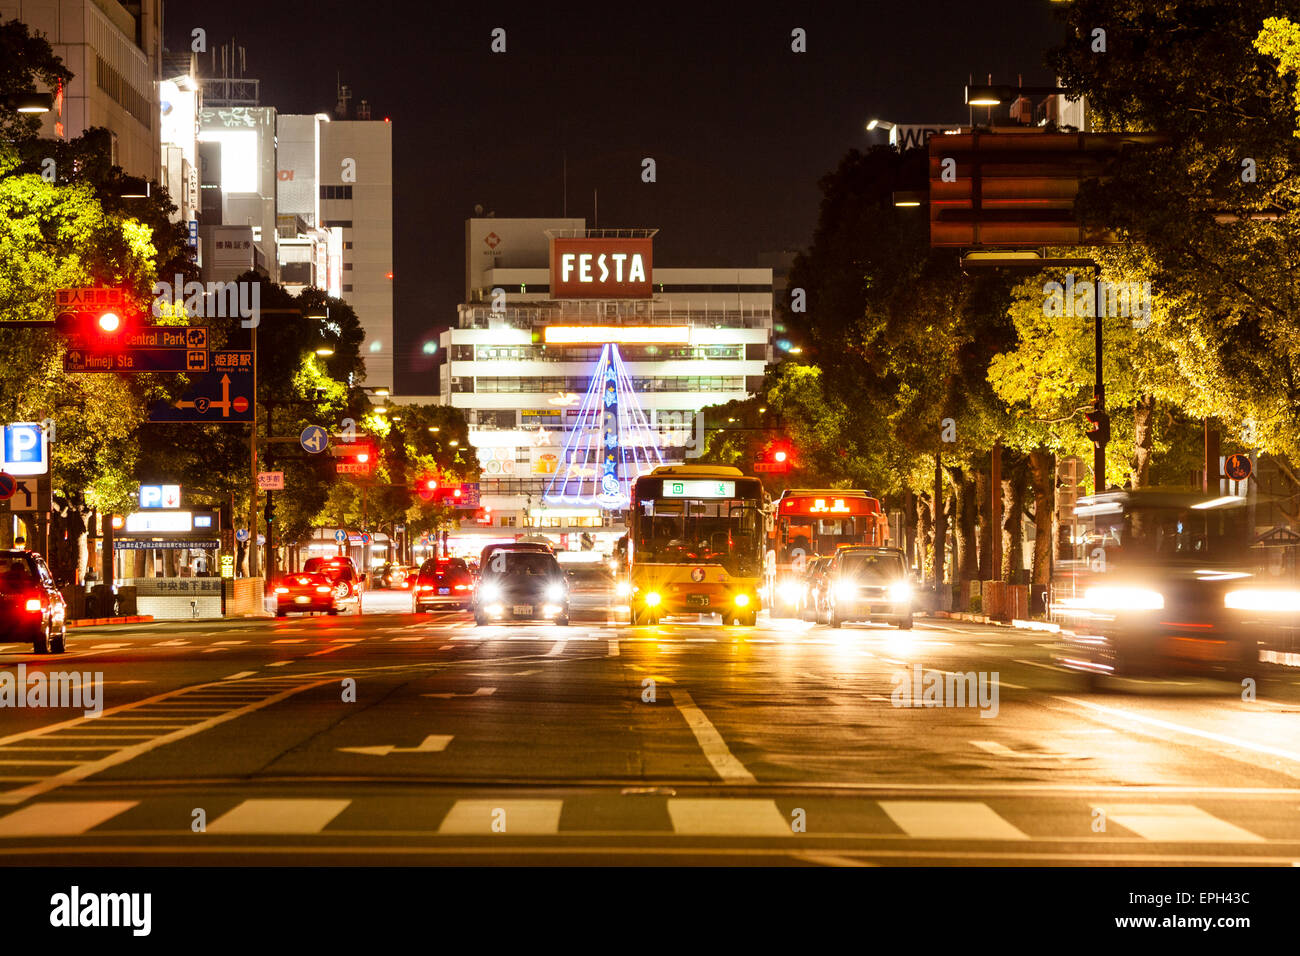 Night view along Otemaedori street with traffic waiting at the crossroads and pedestrian crossing in the foreground, and the Festa building behind. Stock Photo